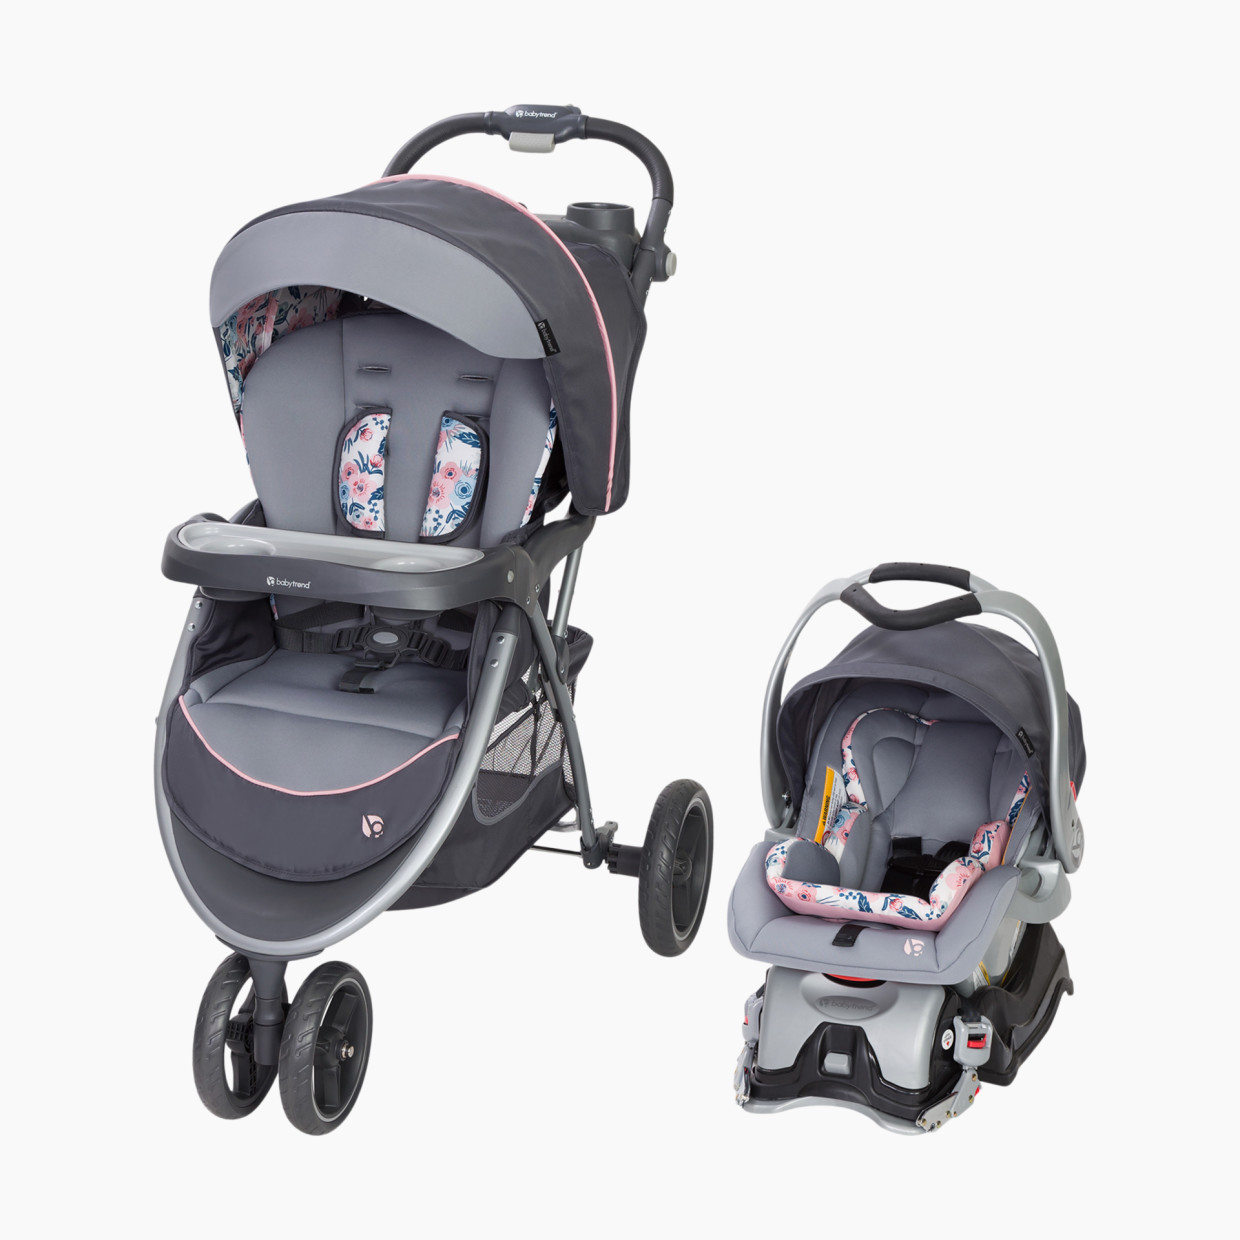 Baby Trend Skyview Plus Travel System - Bluebell.